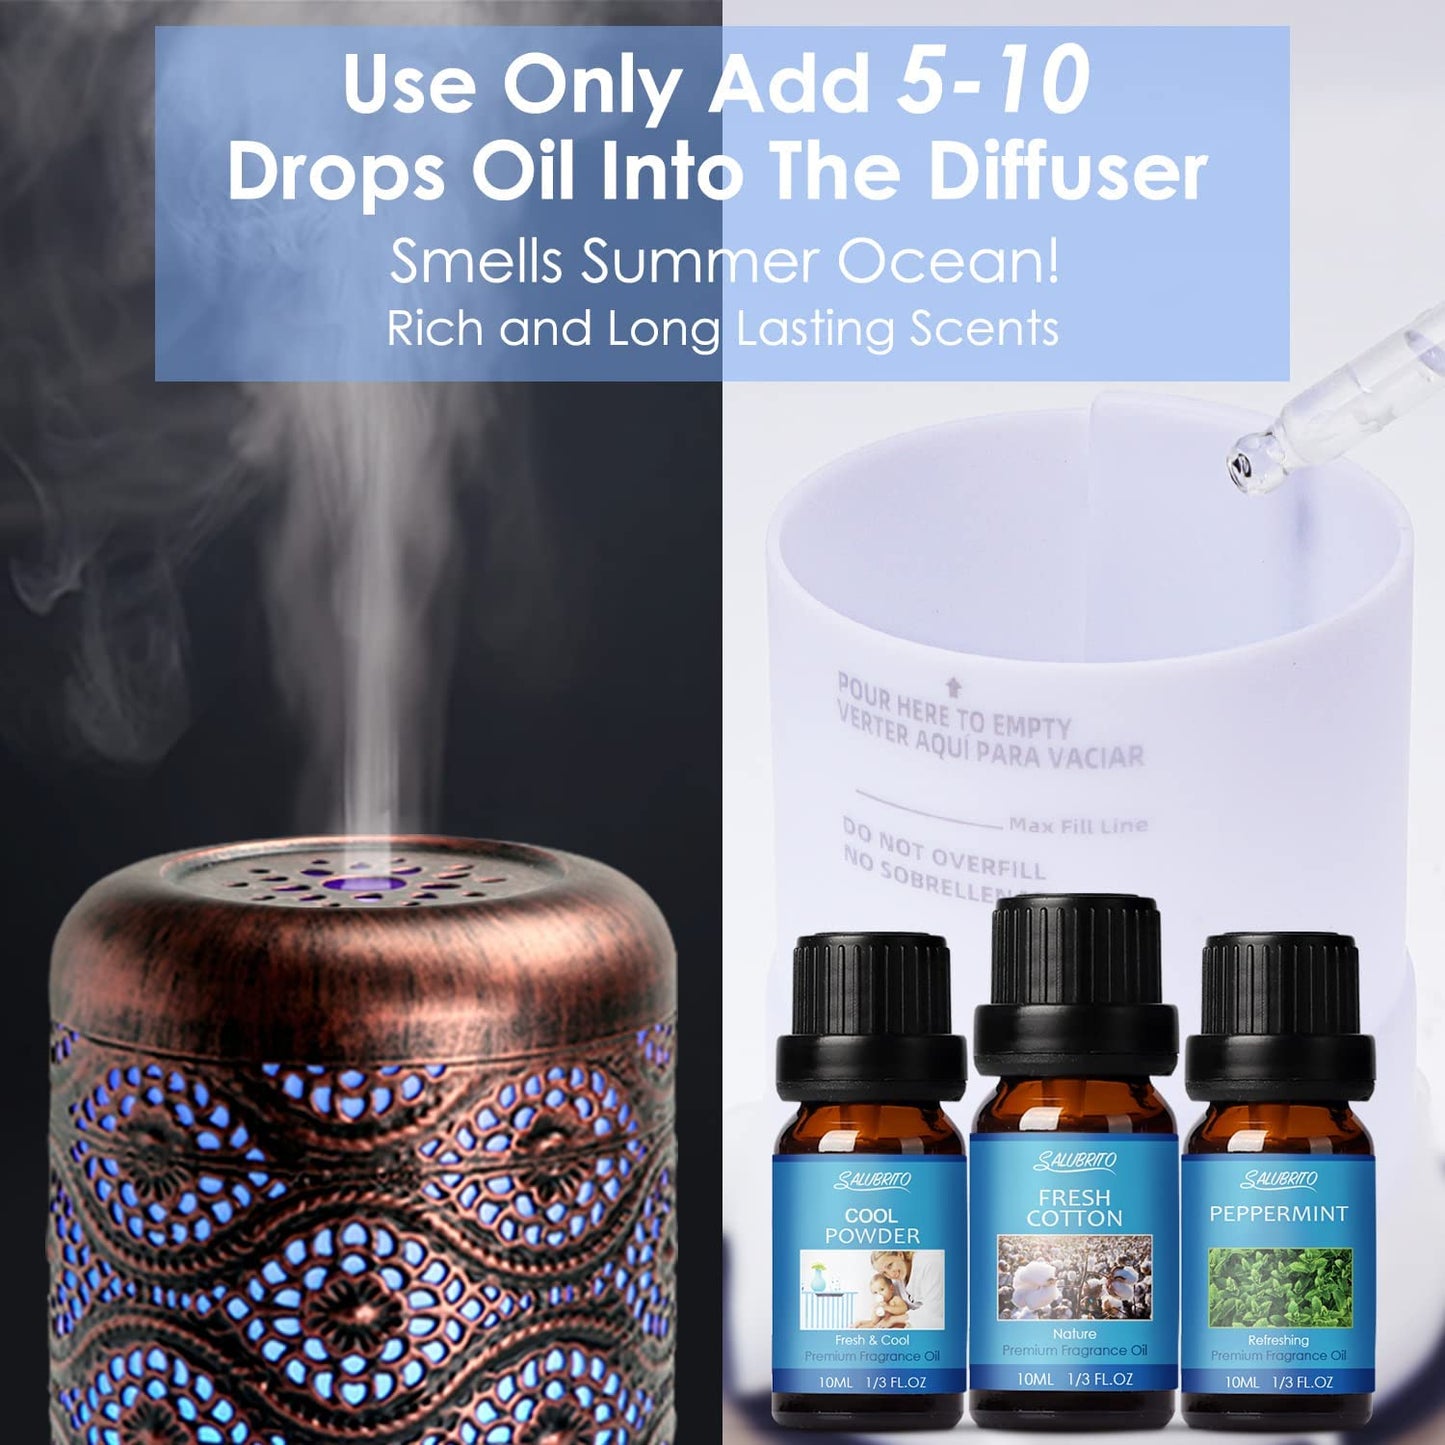  Summer Essential Oils Set for Diffuser, Aromatherapy Oils Gift Set for Home, Scented Oil for Soap & Candle Making - Midsummer Night, Pineapple, Peppermint Fragrance Oils and More